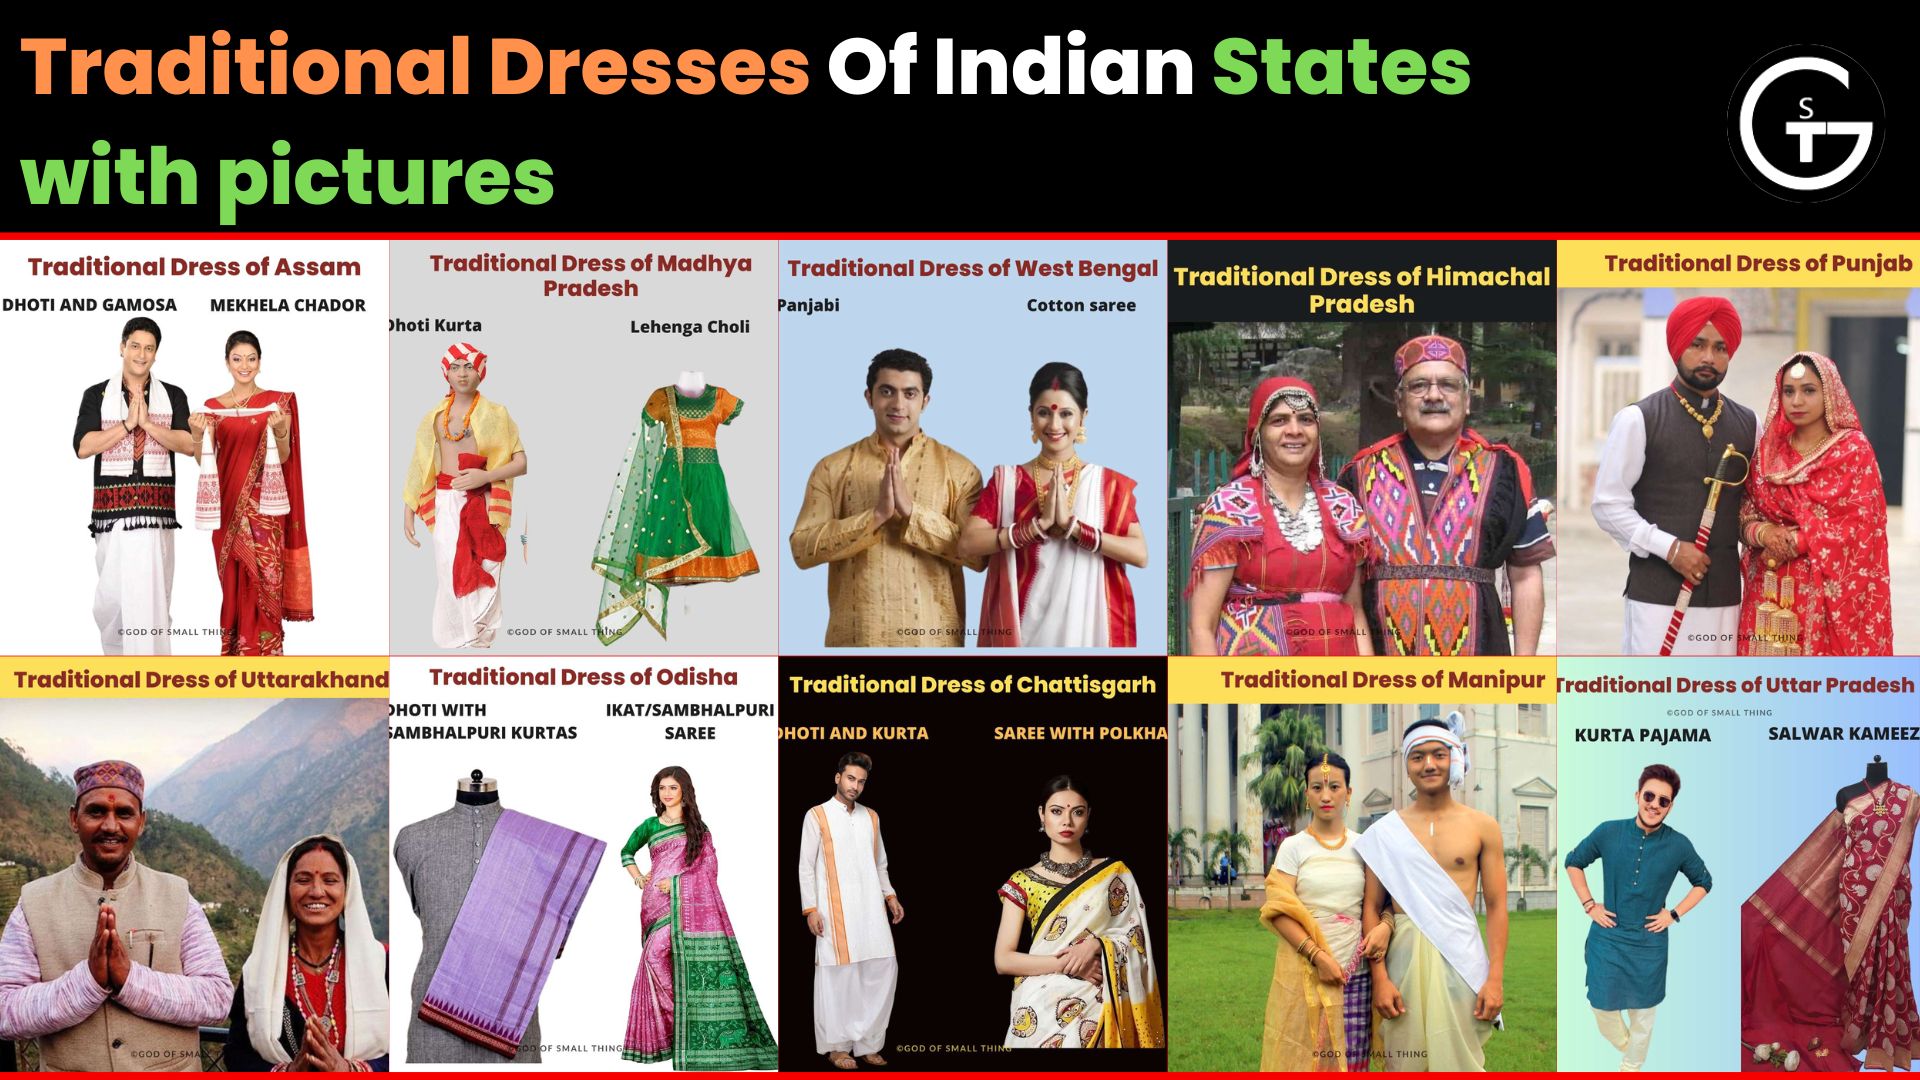 Traditional Dresses of Indian States with pictures - Cultural India